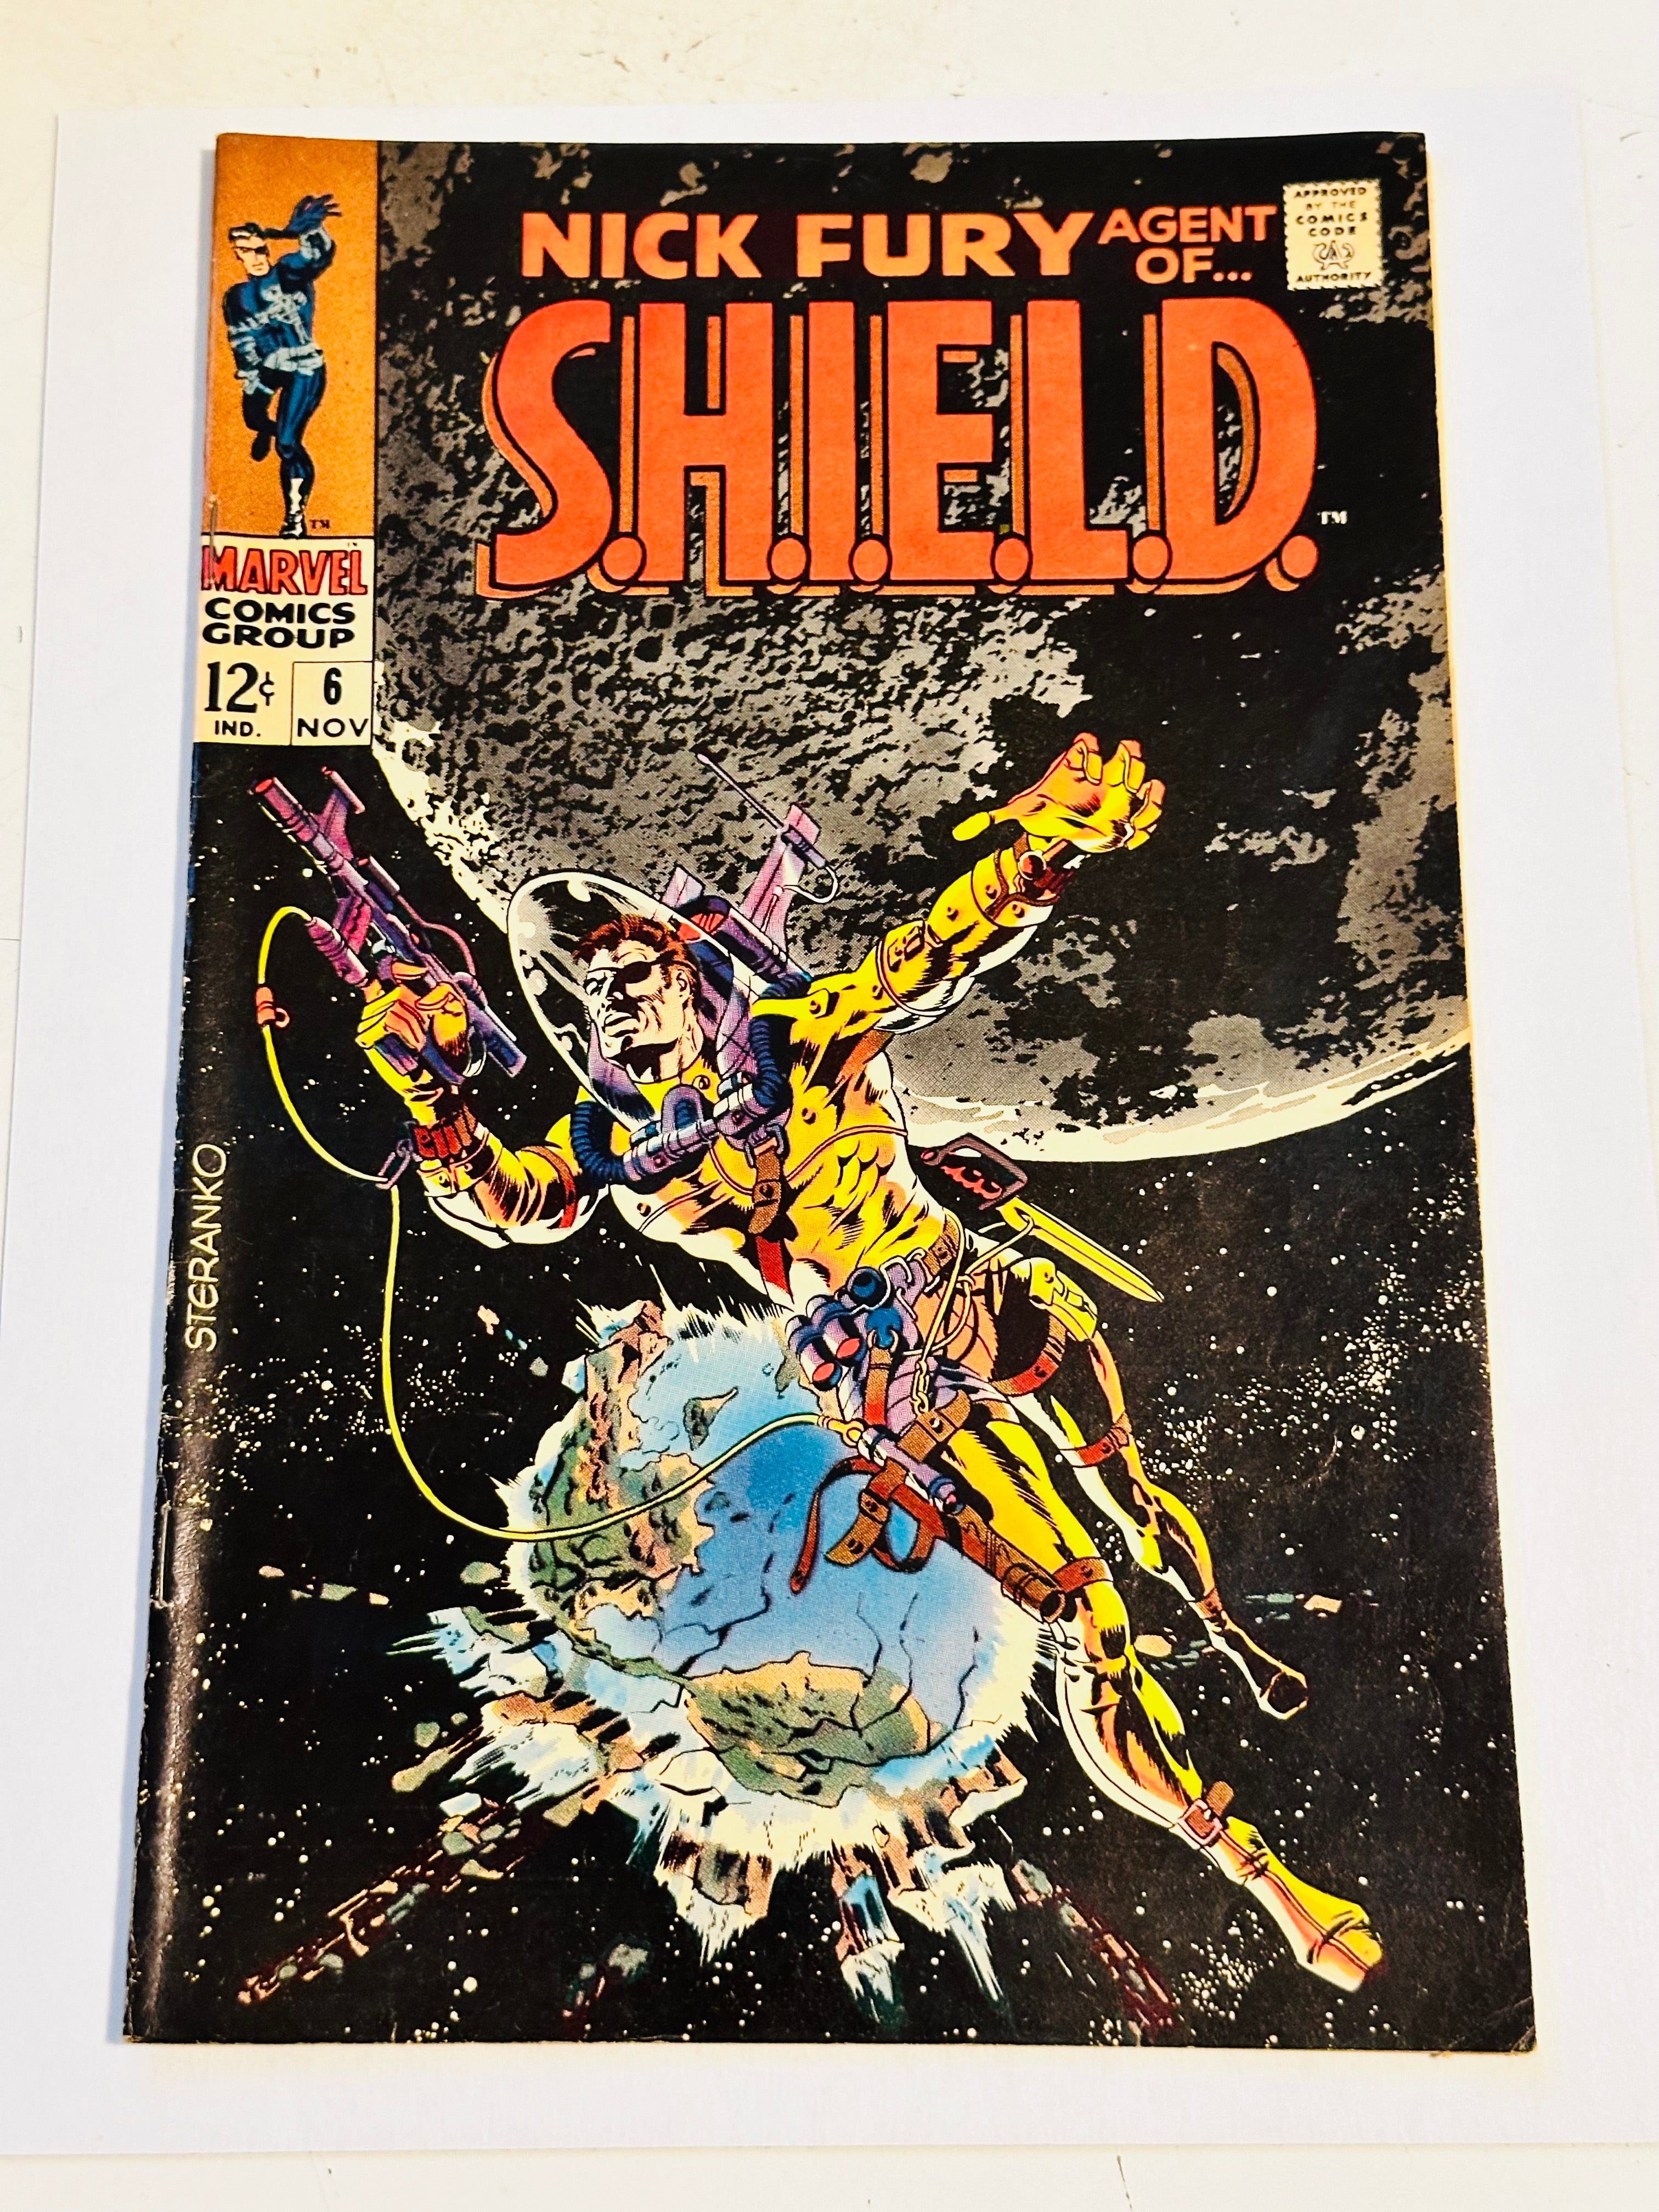 Nick Fury Agent of Shield high grade condition comic book 1968